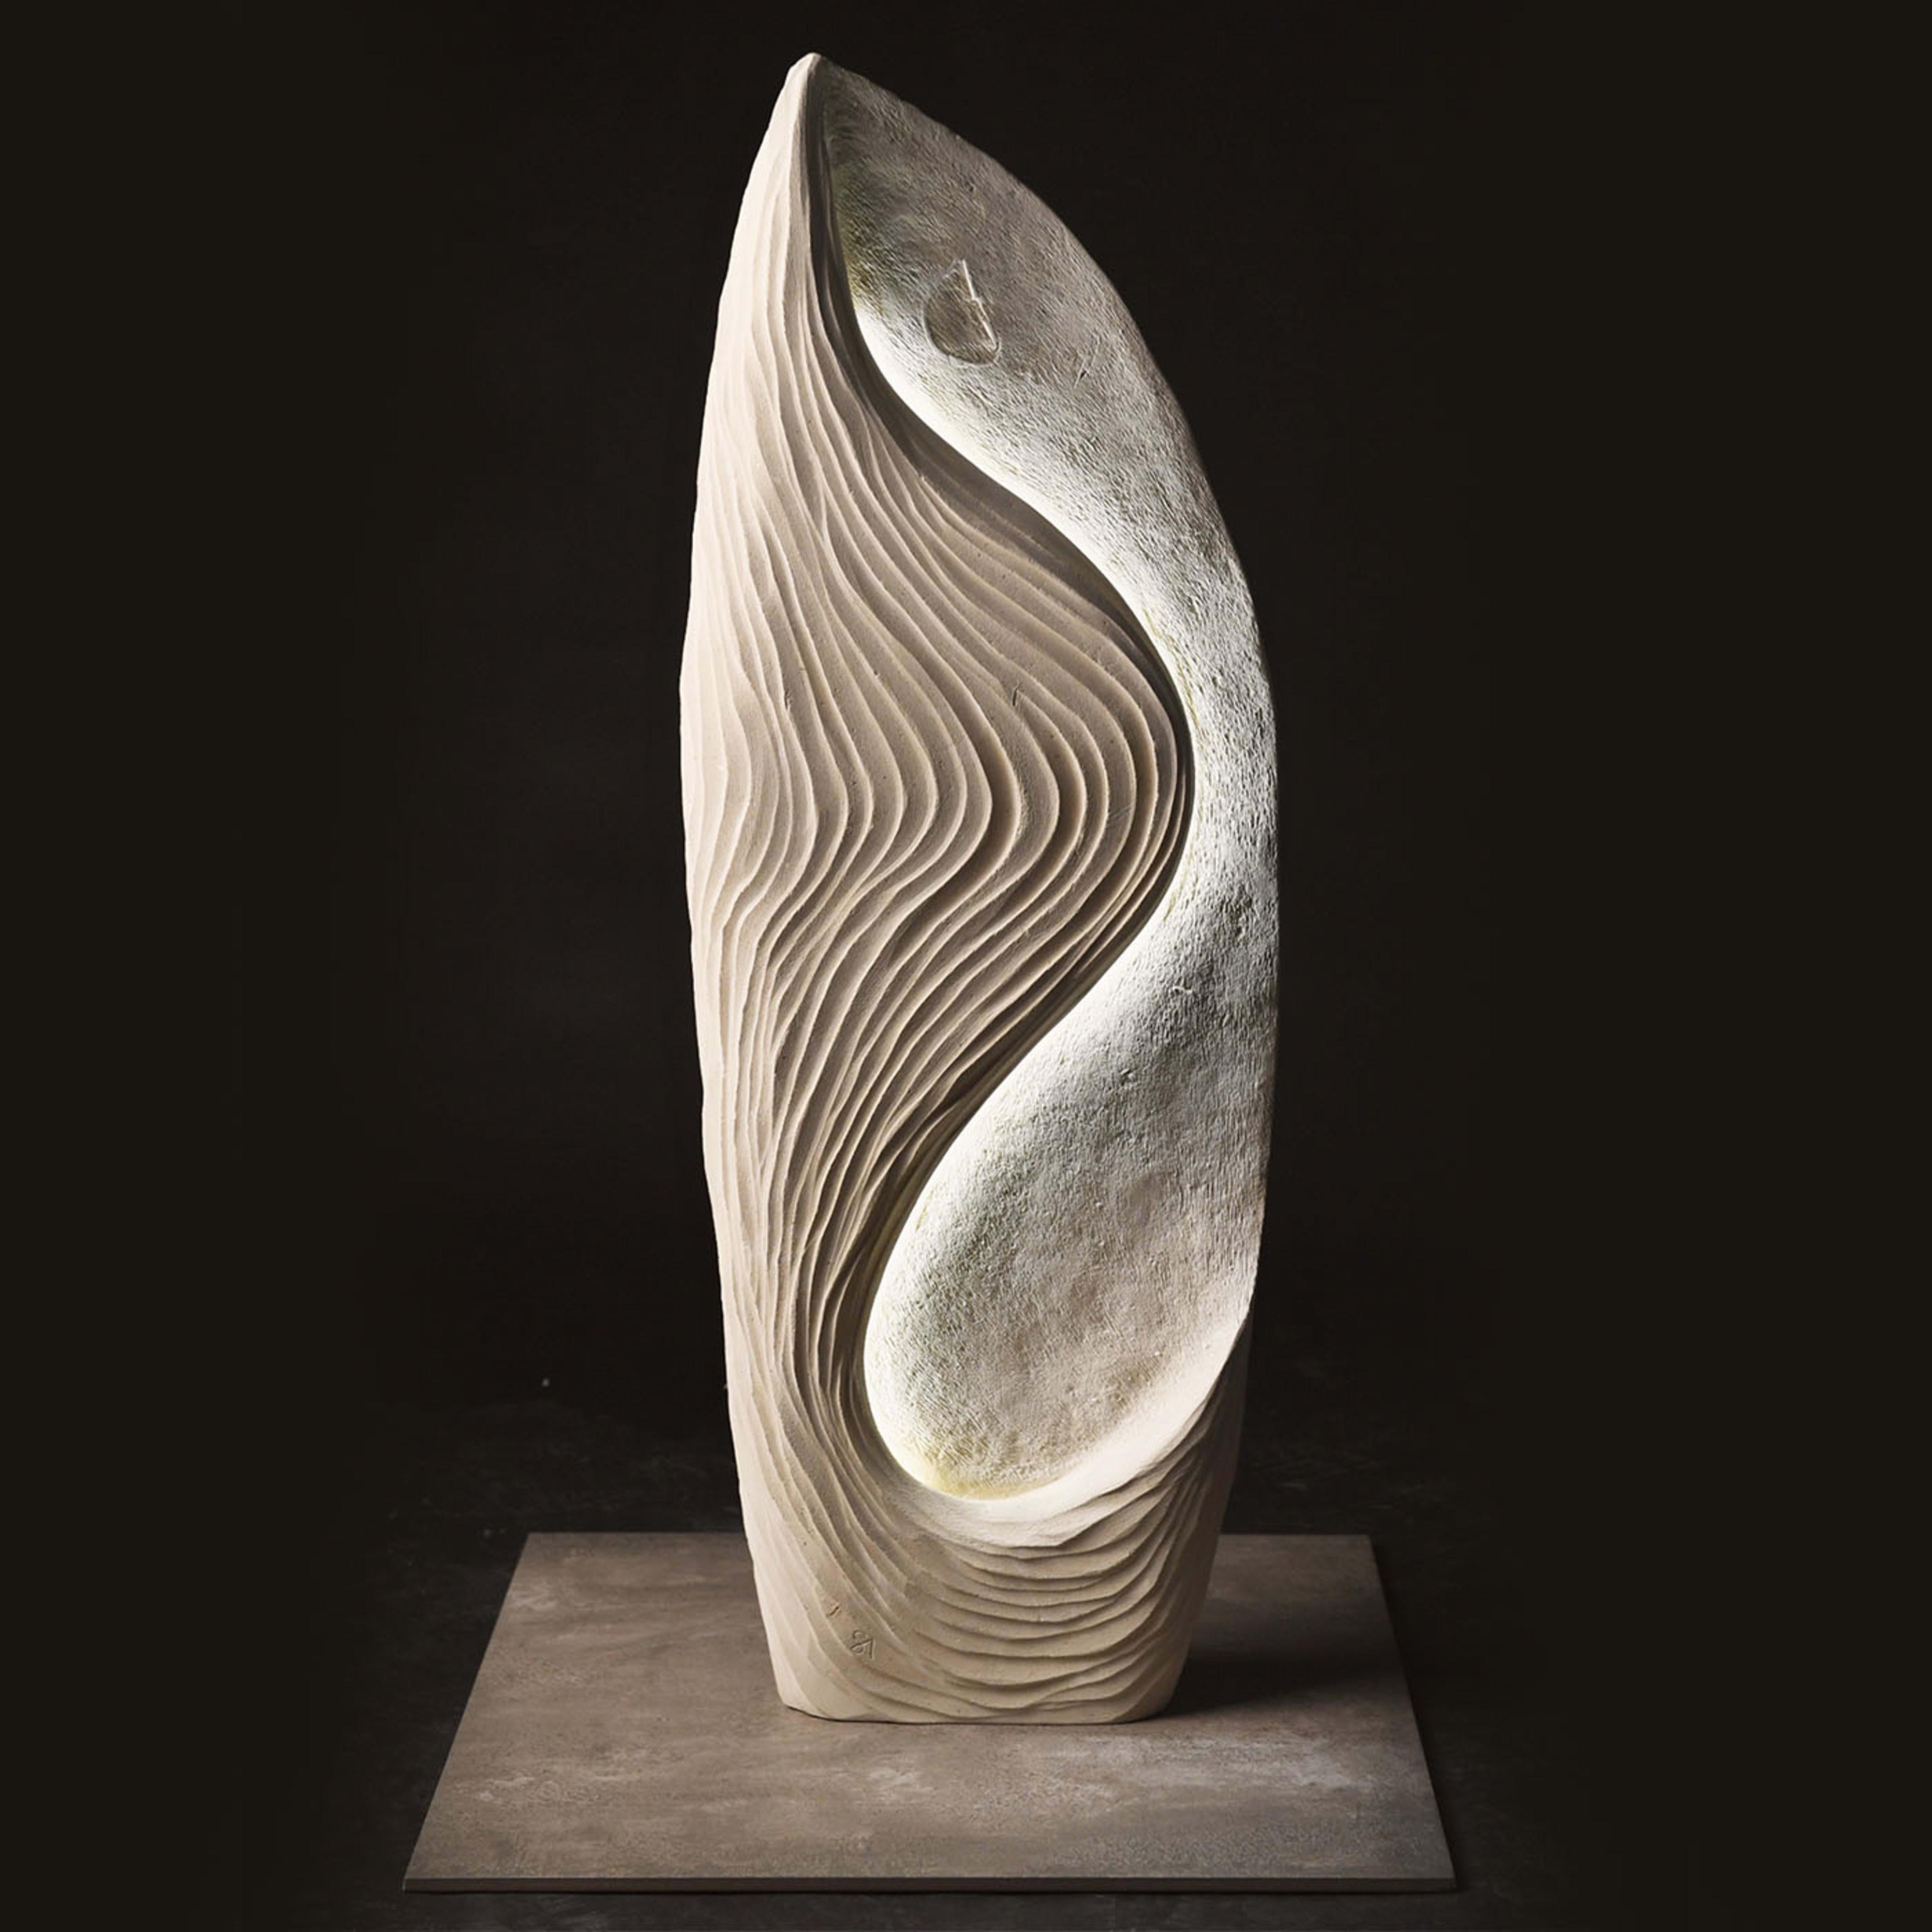 This one-of-a-kind sculpture by artist Andrea Serra is handcrafted of a special marine-origin white stone rich in fossils. Only quarriable near Lecce, Apulia, this stone here employed is enriched with a warm white LED strip whose glow gets seemingly